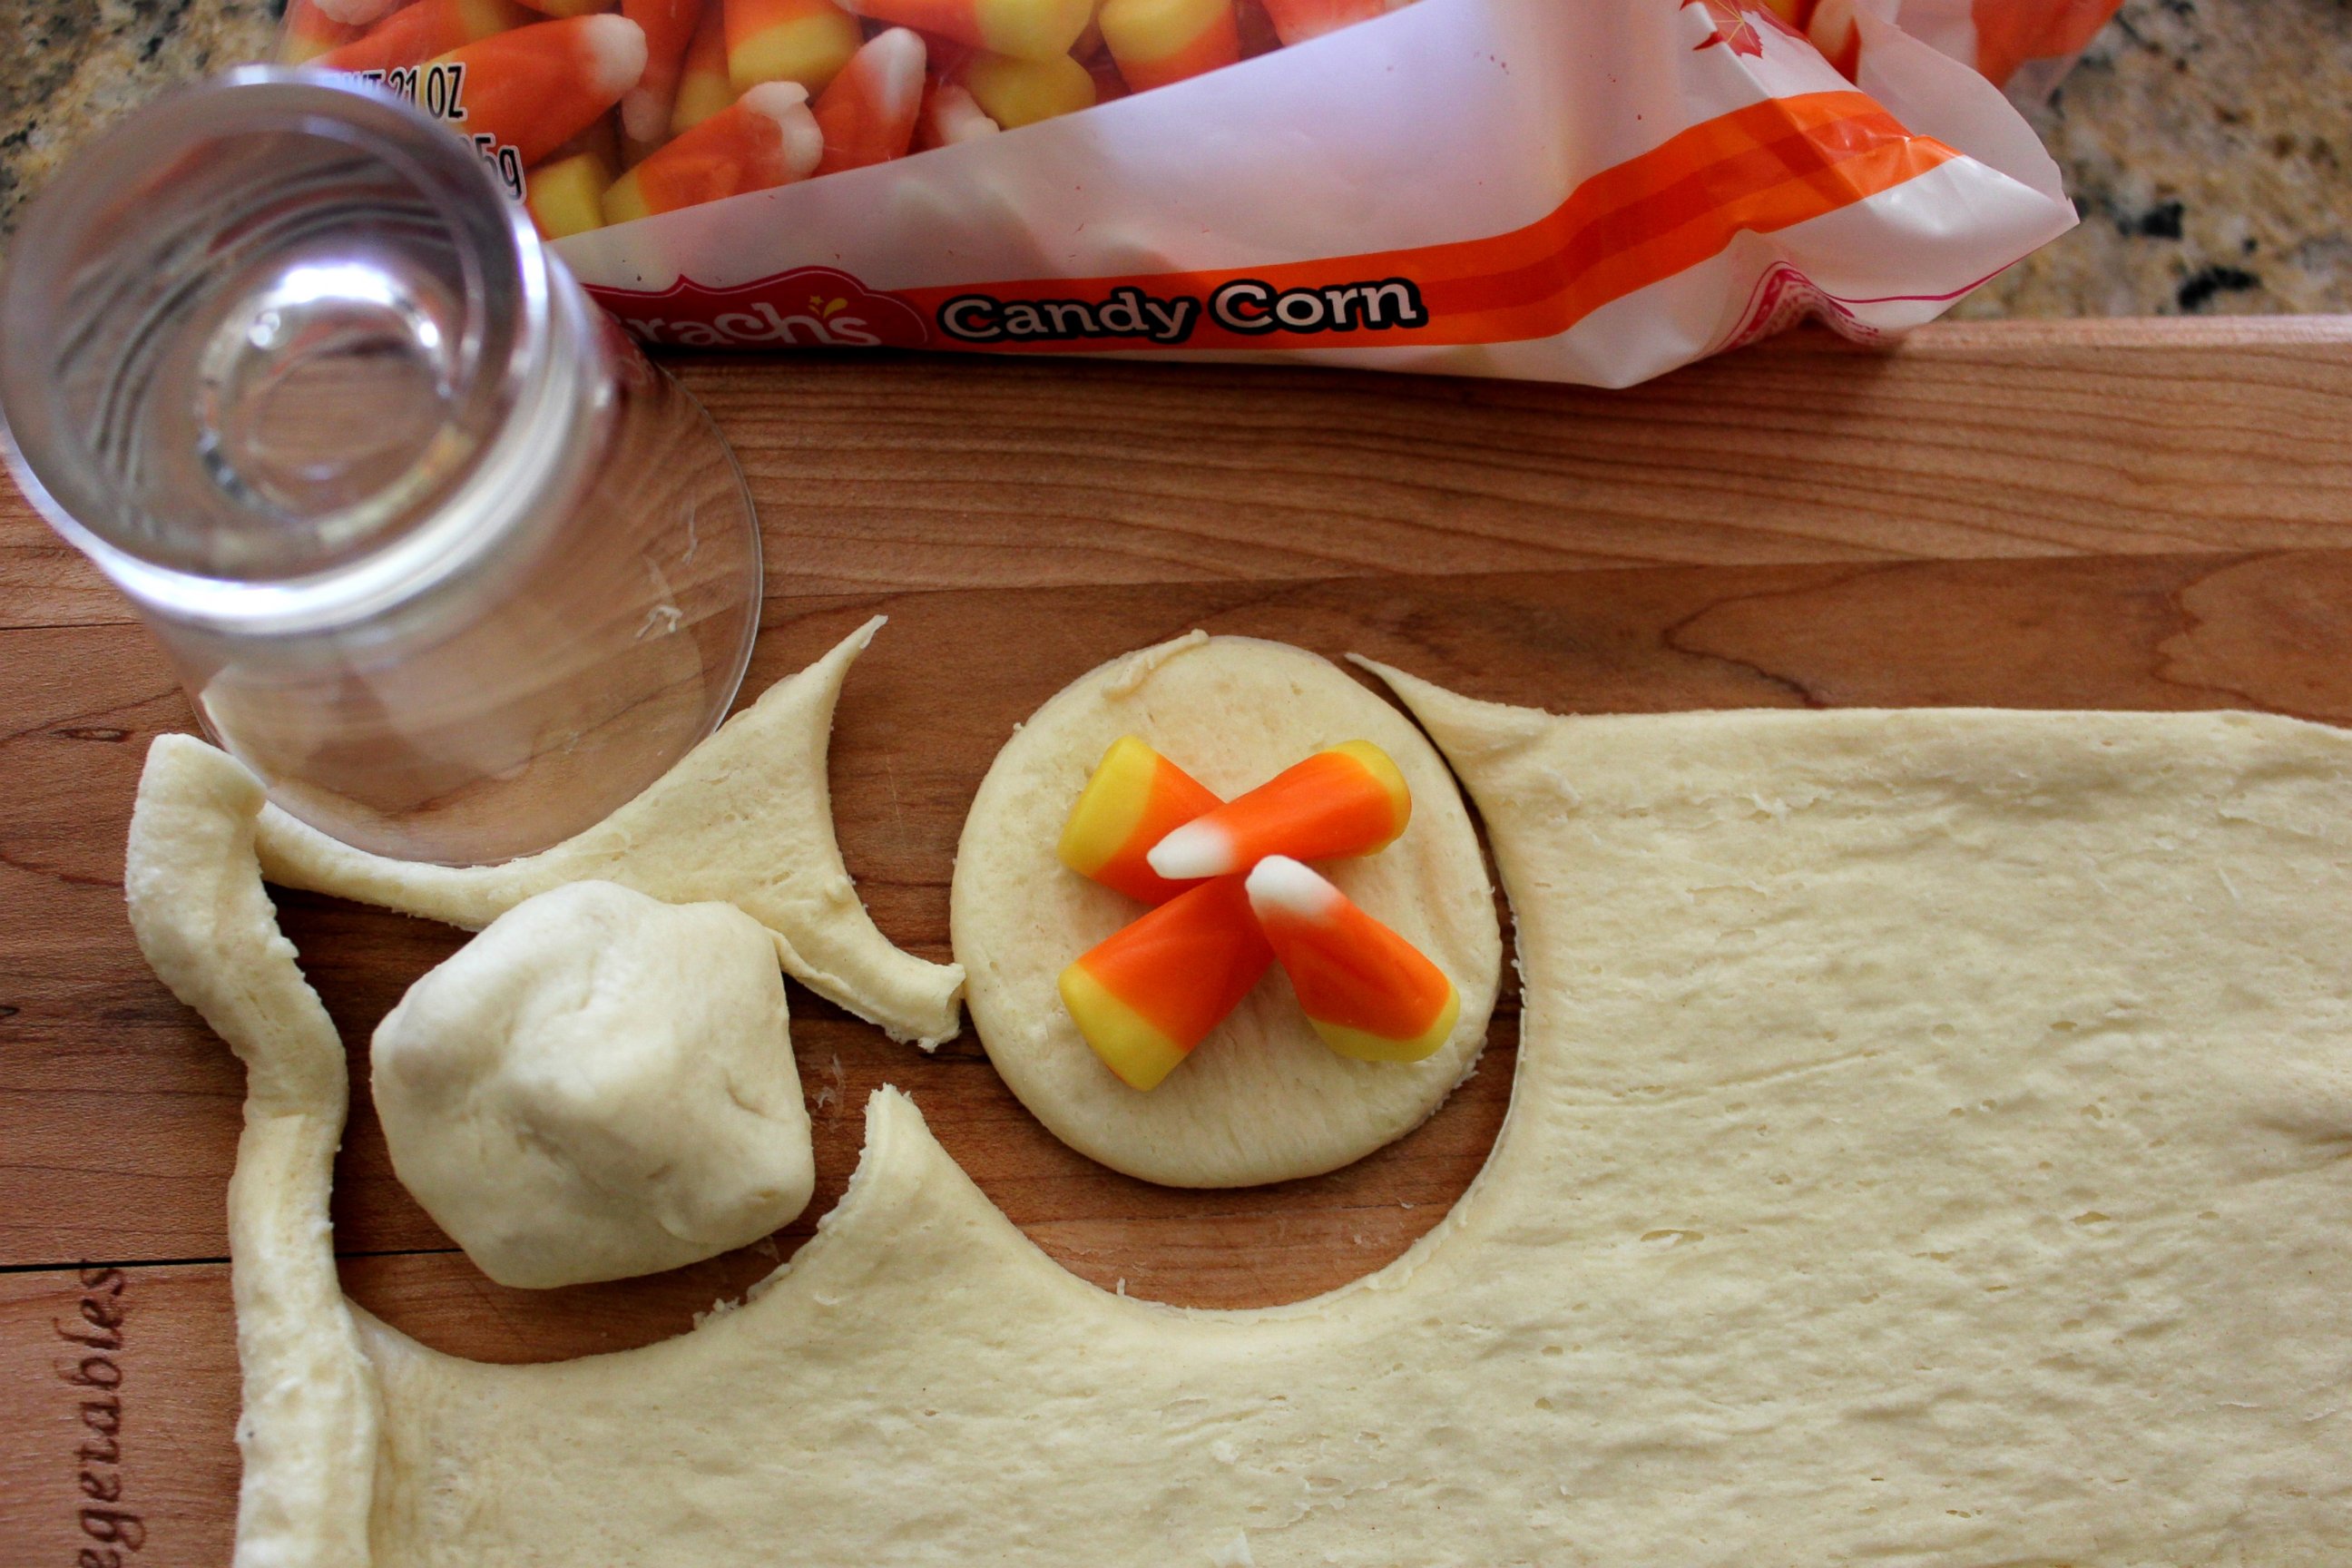 PHOTO: Deep-fried candy corn is made by stuffing the candy into crescent dough and frying.